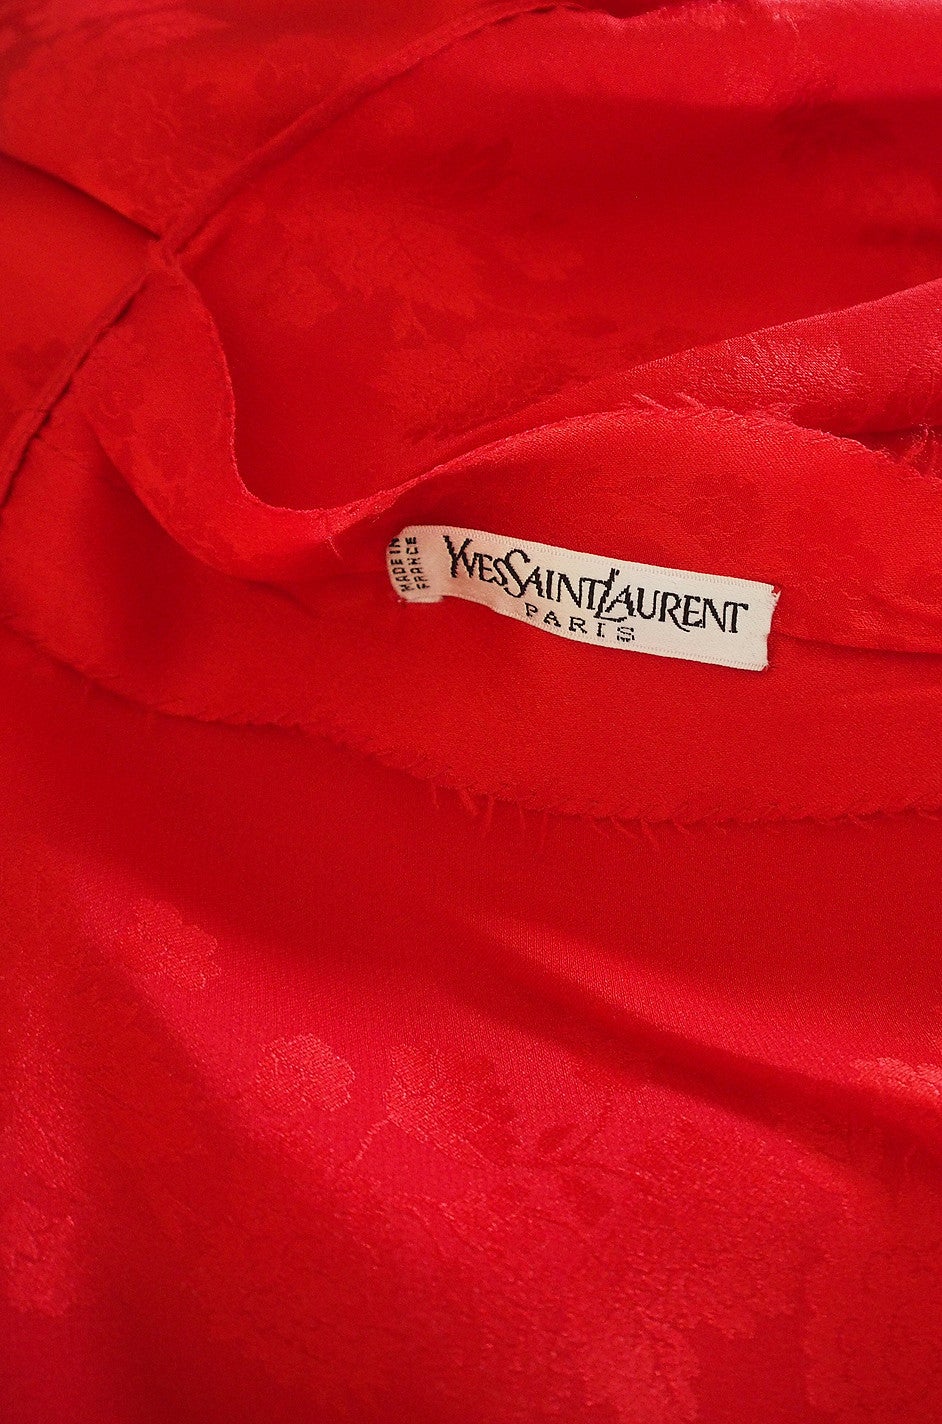 1979 Yves Saint Laurent Haute Couture Red Silk Top For Sale 2